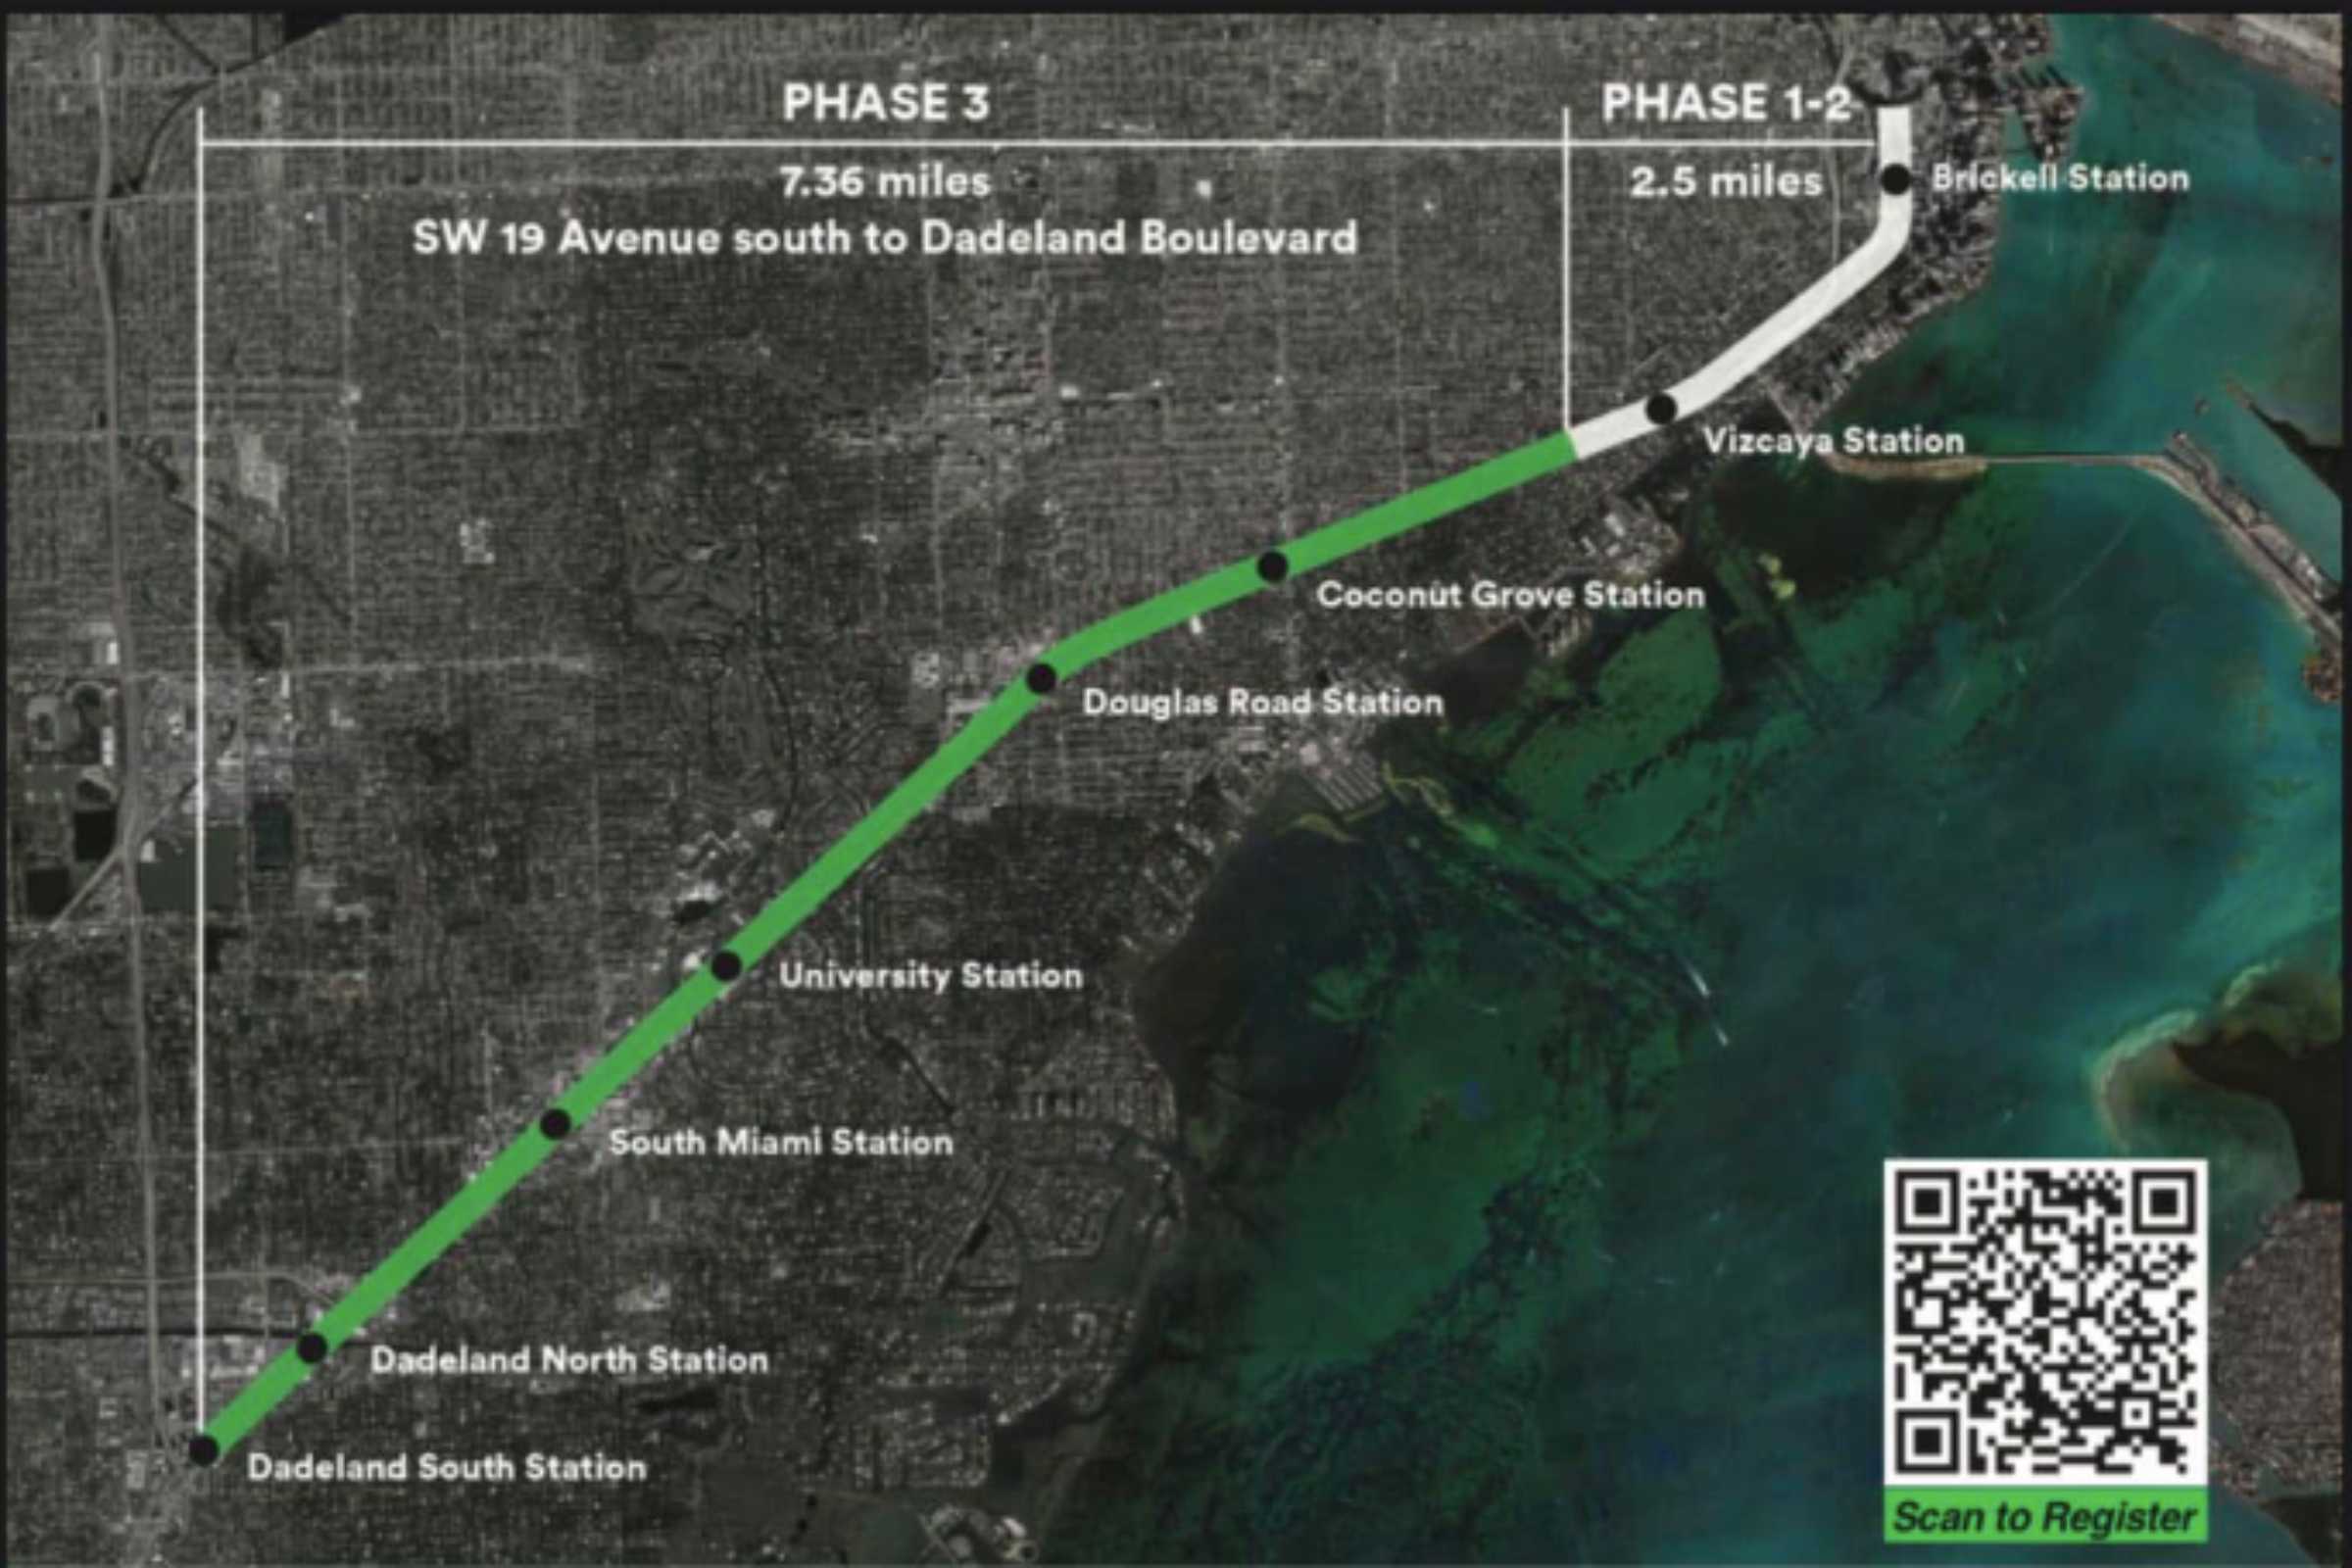 What Would You Like To See Incorporated Into Phase 3 of Miami’s Underline Park?